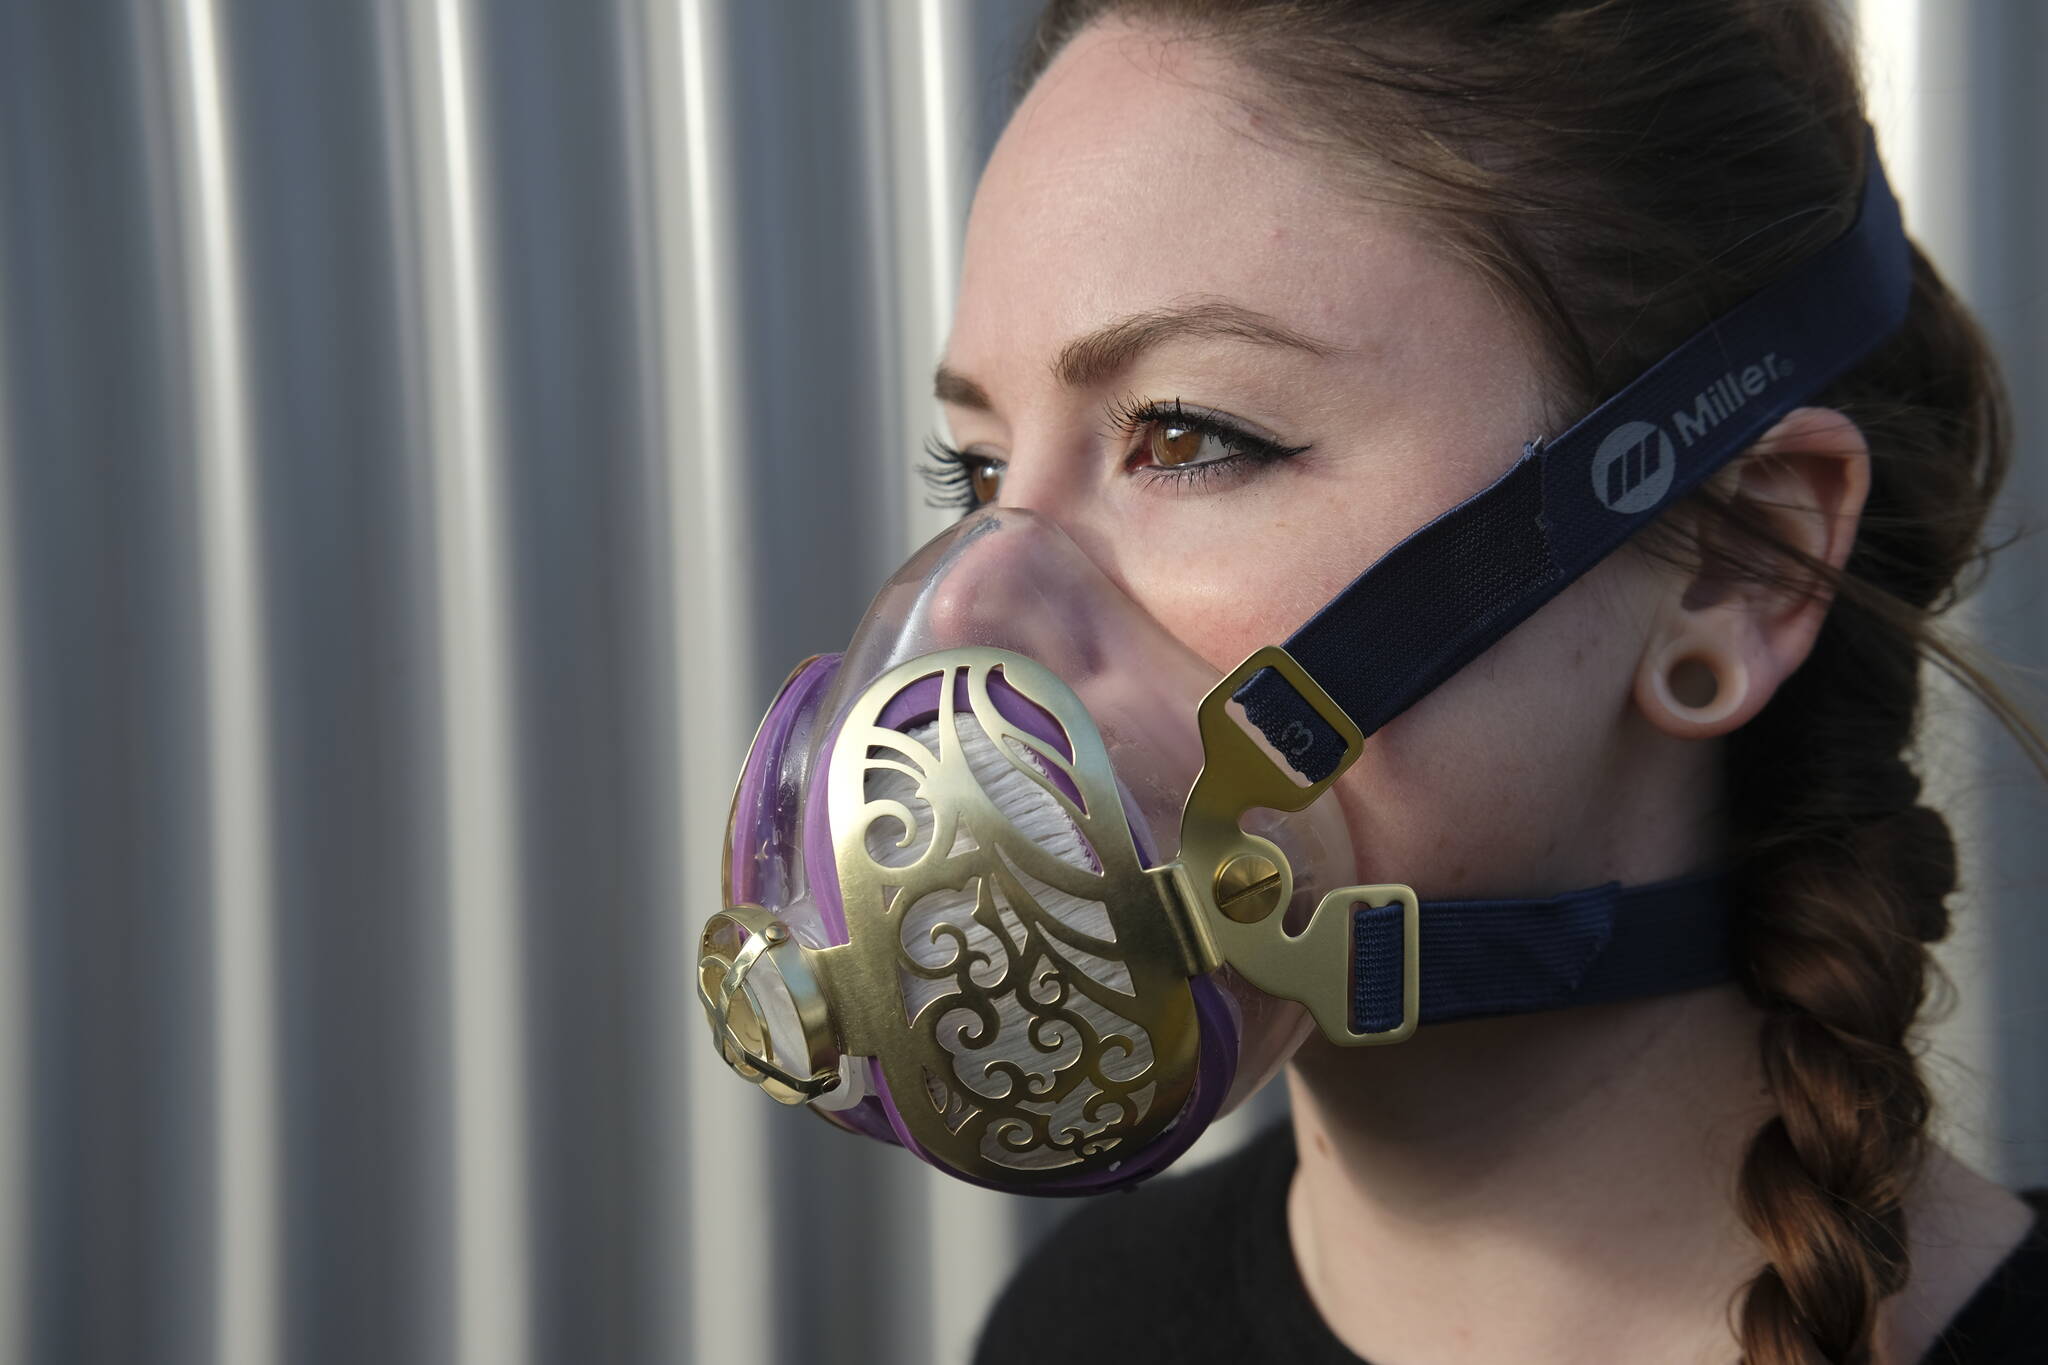 Contributed photo by Derek Castro
“A Breath of Fresh Air” - Lauryl Gaumer wearing her unique respirator that is on display in the current Artists Registry show at SJIMA.